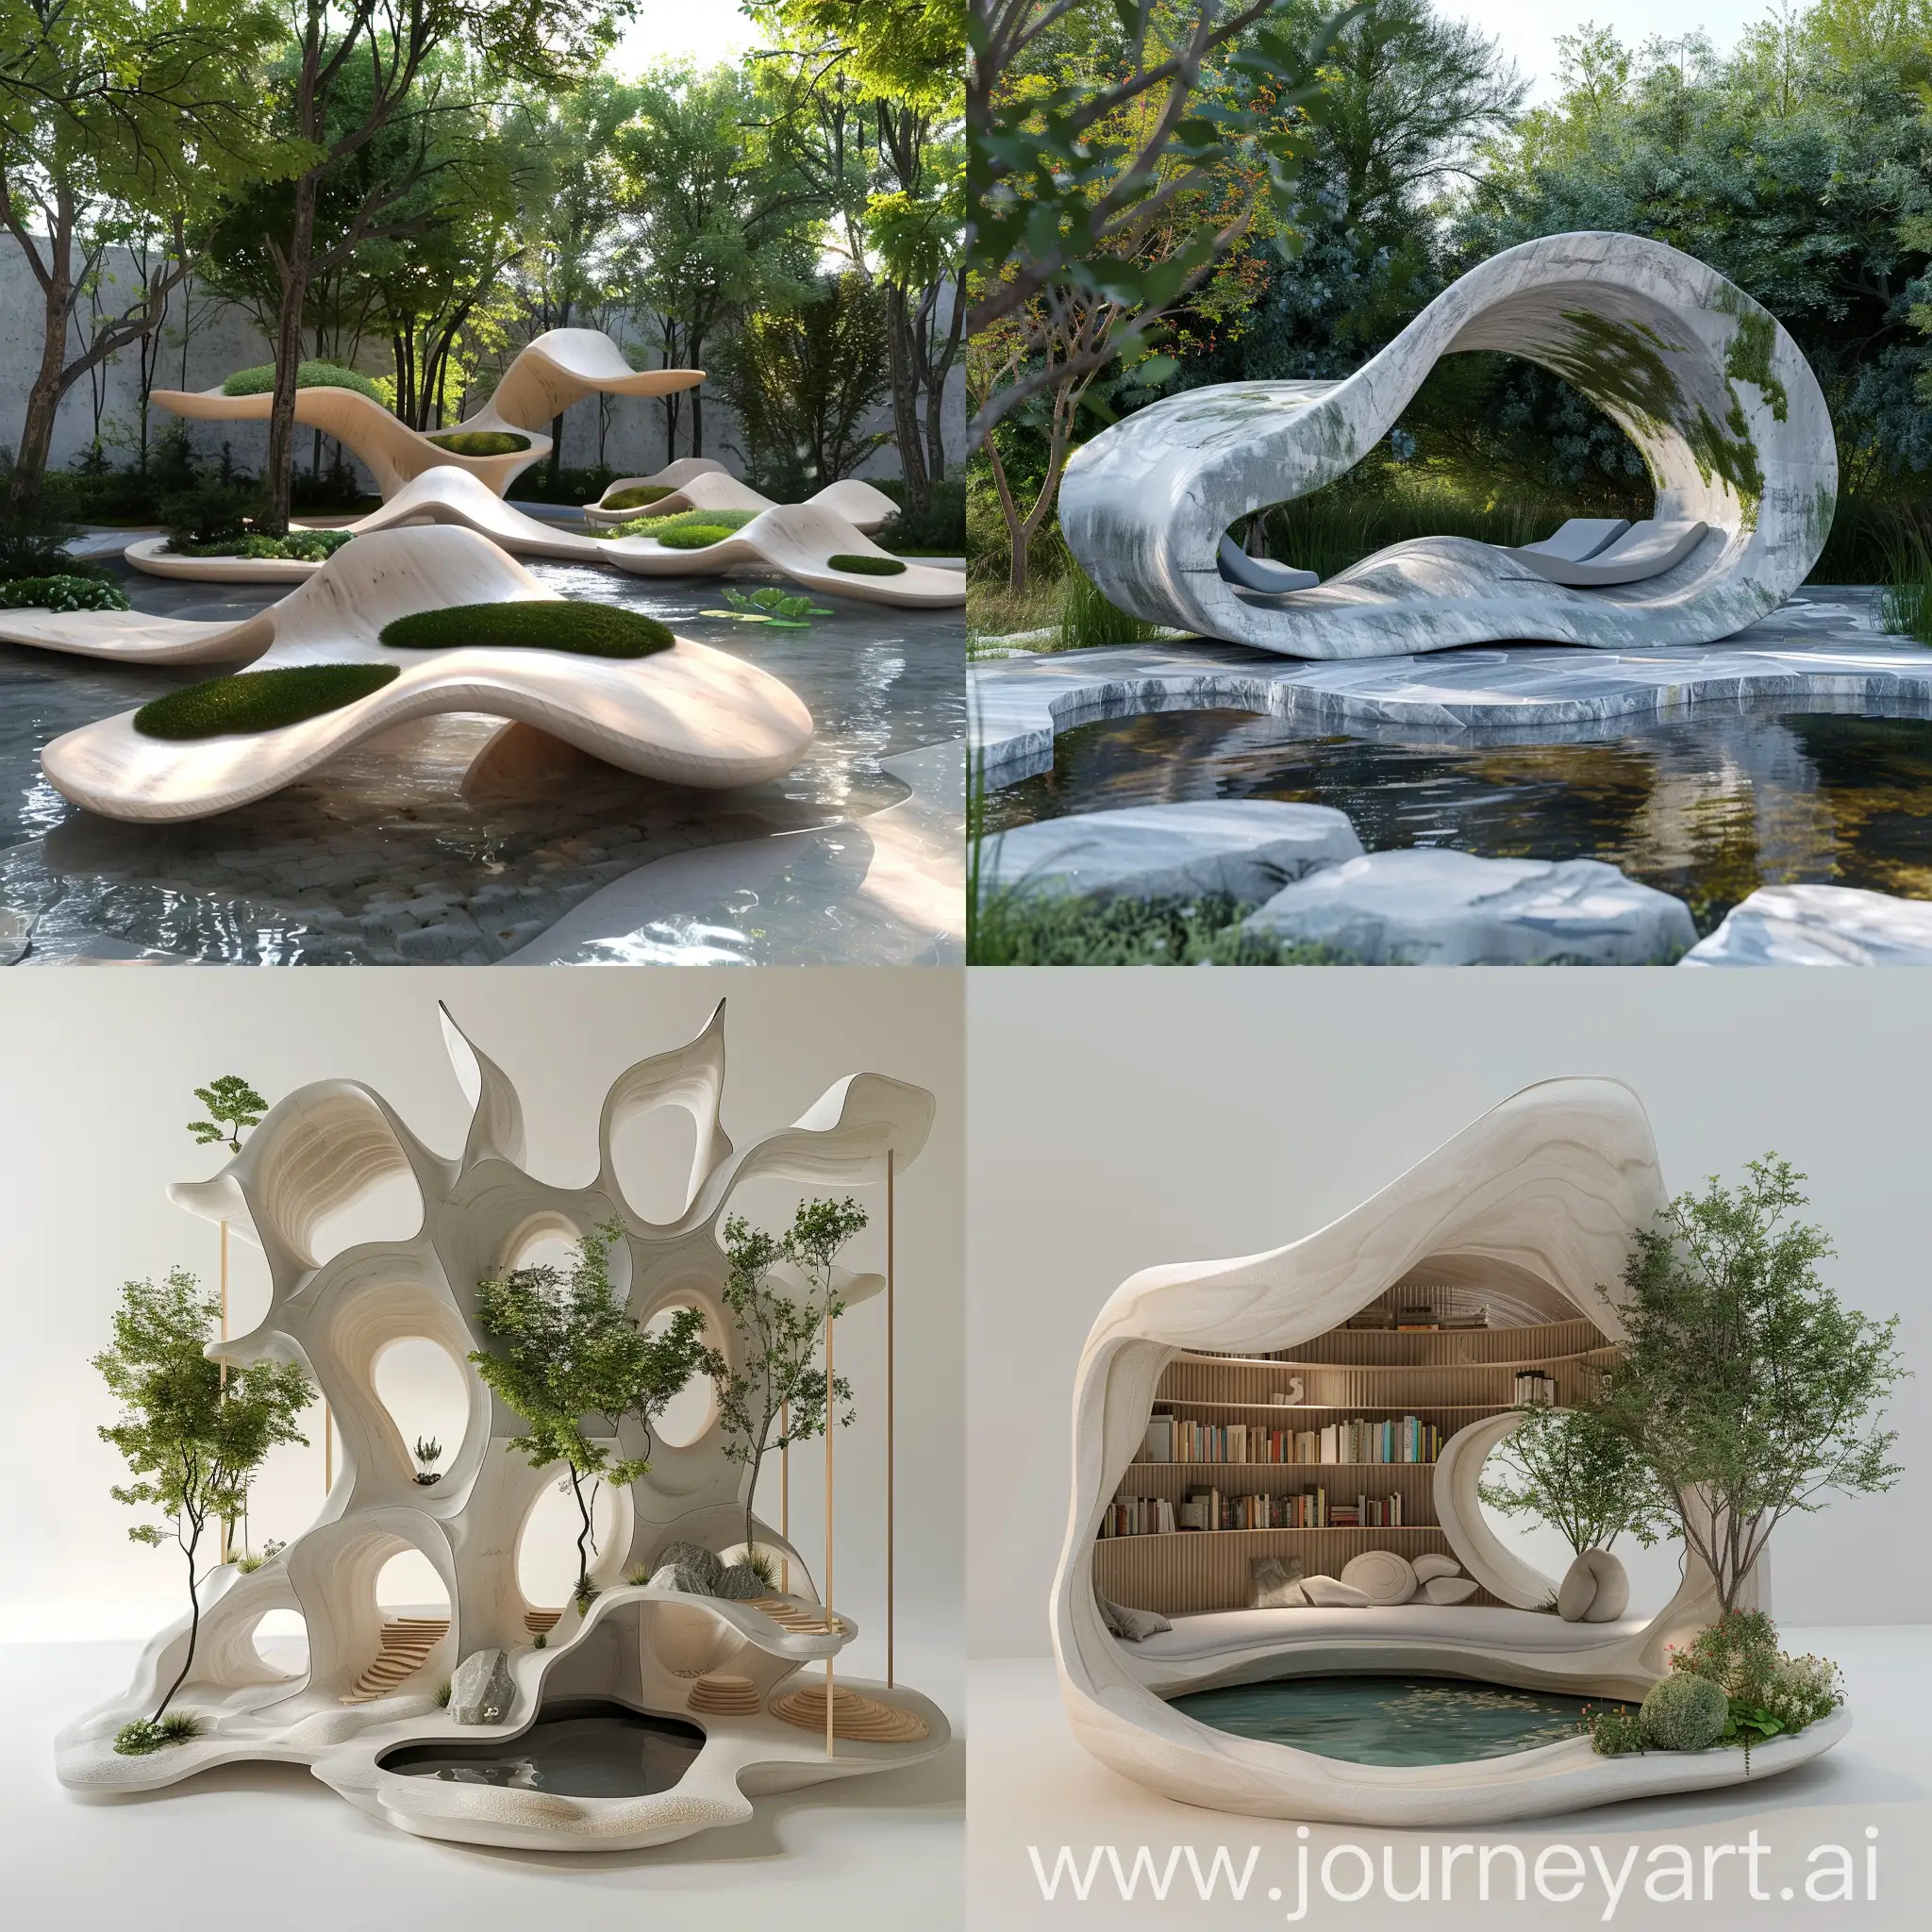 Psychological Element Inspired by "The Midnight Library book":Create a meditative structure inspired by "The Midnight Library" and "Eternal Sunshine of the Spotless Mind," using abstract, flowing forms. The design should feature calming elements like water features and greenery, with materials such as stone and wood. Each unit is approximately 2m x 2m x 2m, with soft, muted tones. These structures are intended for parks, urban squares, and quiet city corners, providing a calming and reflective space for users. The design should incorporate smooth, tactile surfaces and natural elements to enhance psychological well-being.                                                                  Form & Shape: Abstract, flowing forms reminiscent of natural elements.
Structure: Stand-alone or integrated into existing urban landscapes.
Dimensions: Approx. 2m x 2m x 2m for a single unit.
Materials: Stone, wood, water-resistant coatings.
Colors: Soft, muted tones (blue, gray, white).
Details: Smooth, tactile surfaces, water features, and greenery.
Features: Seating areas, small water features, and plant integration.
Location: Parks, urban squares, quiet corners in cities.
Design Style: Surrealist-inspired minimalism with natural elements.